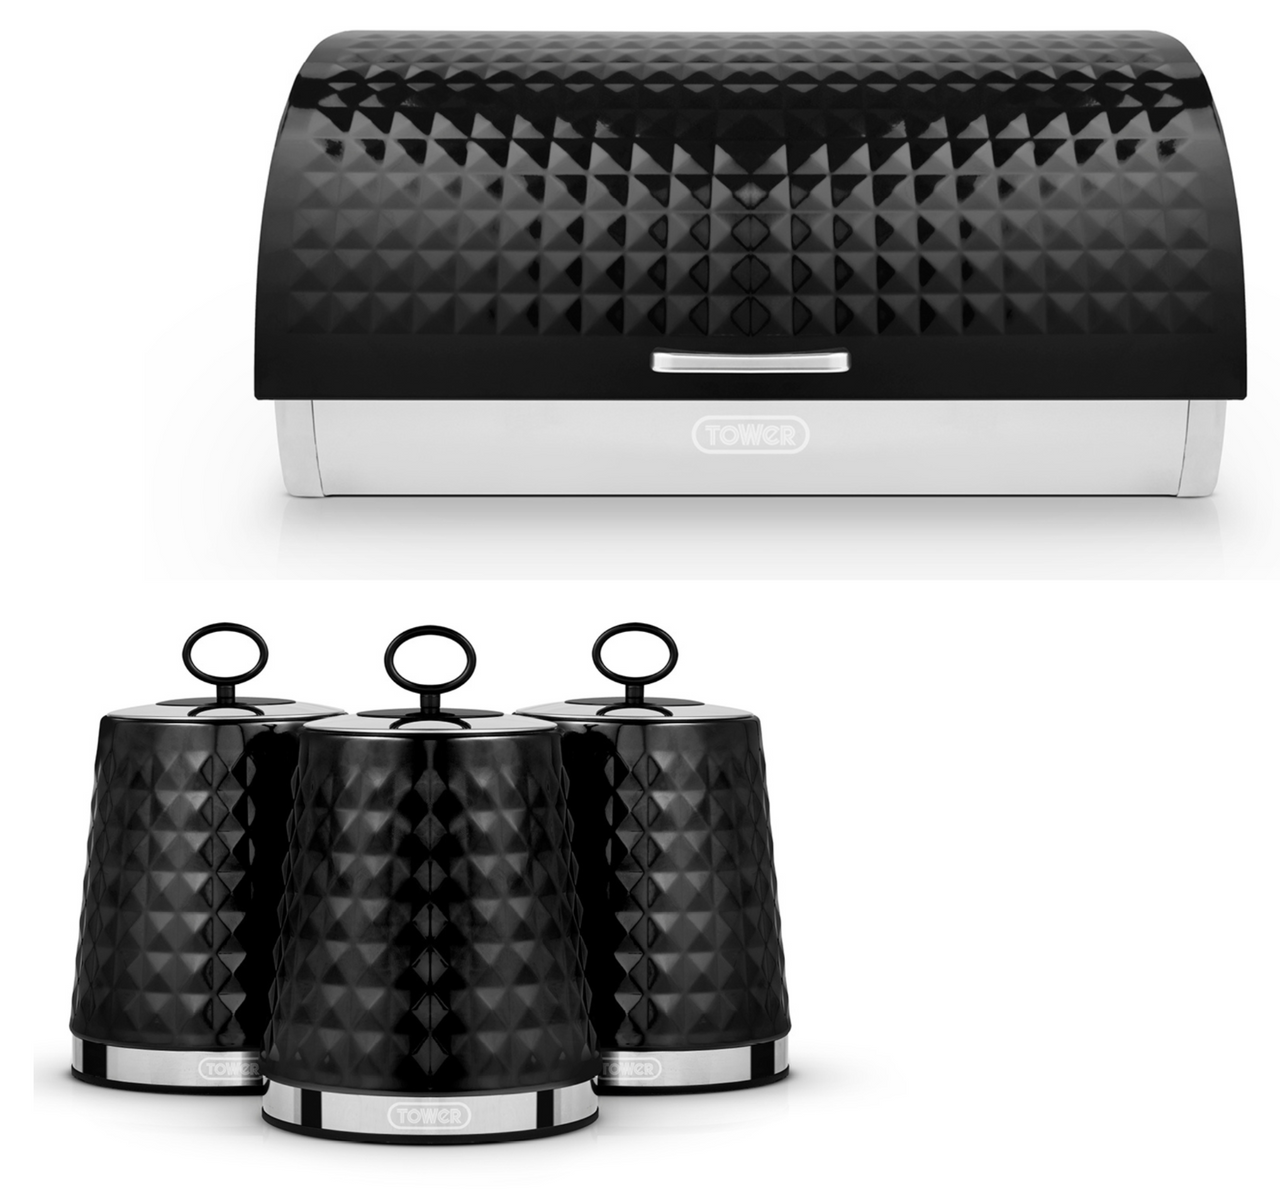 Tower Solitaire Black Bread Bin & Canisters Storage Set with Embossed Diamond Design